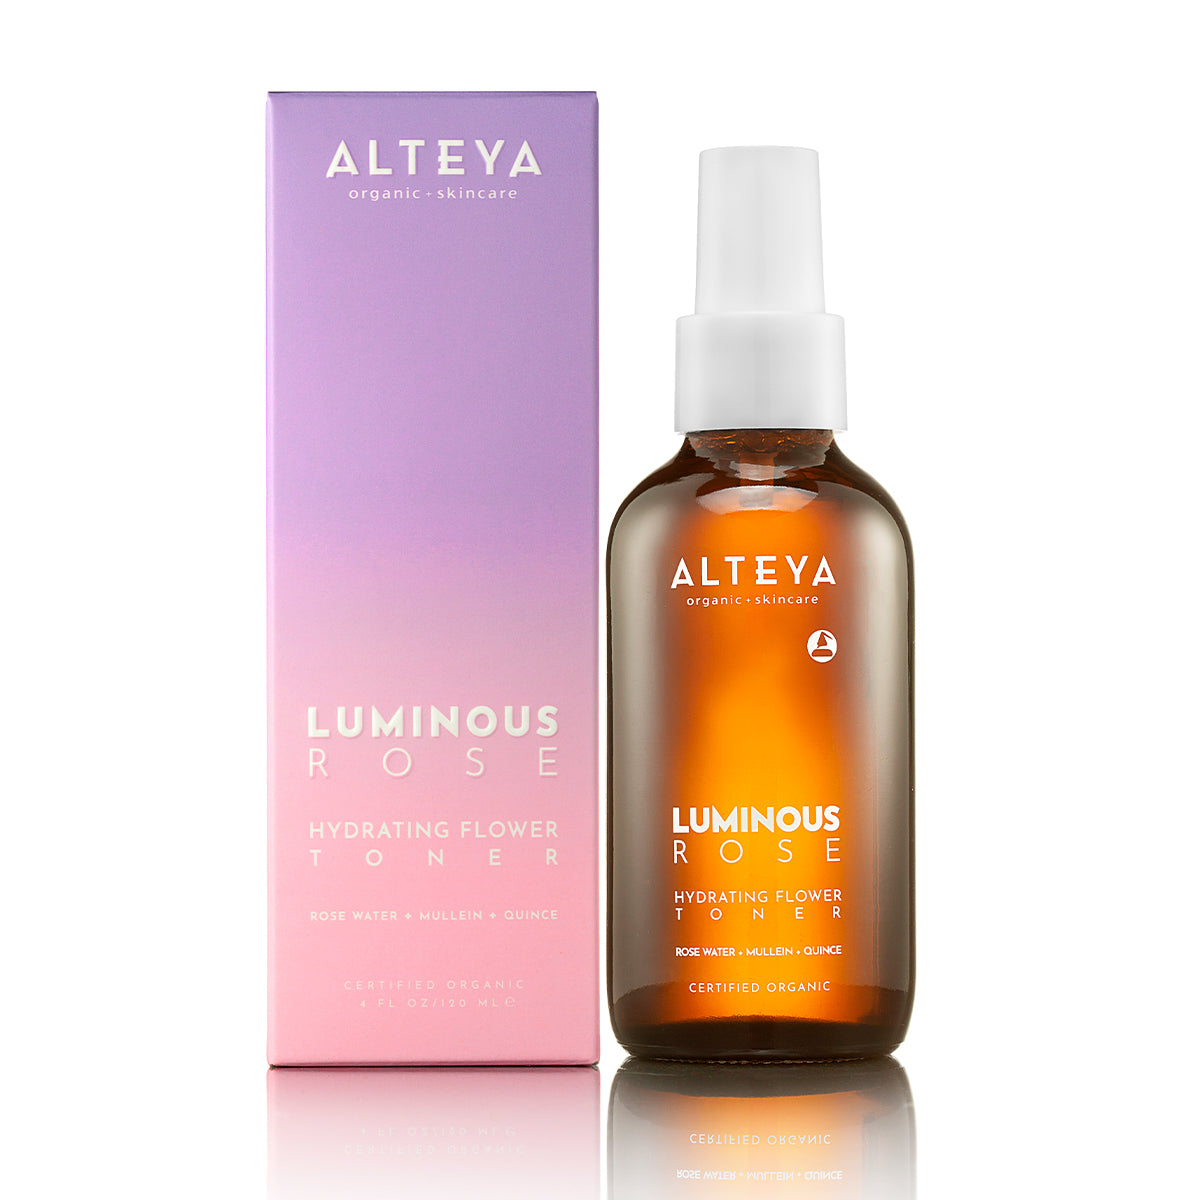 Introducing Hydrating Flower Toner Luminious Rose by Alteya Organics, a gentle toner designed to purify and hydrate your skin.